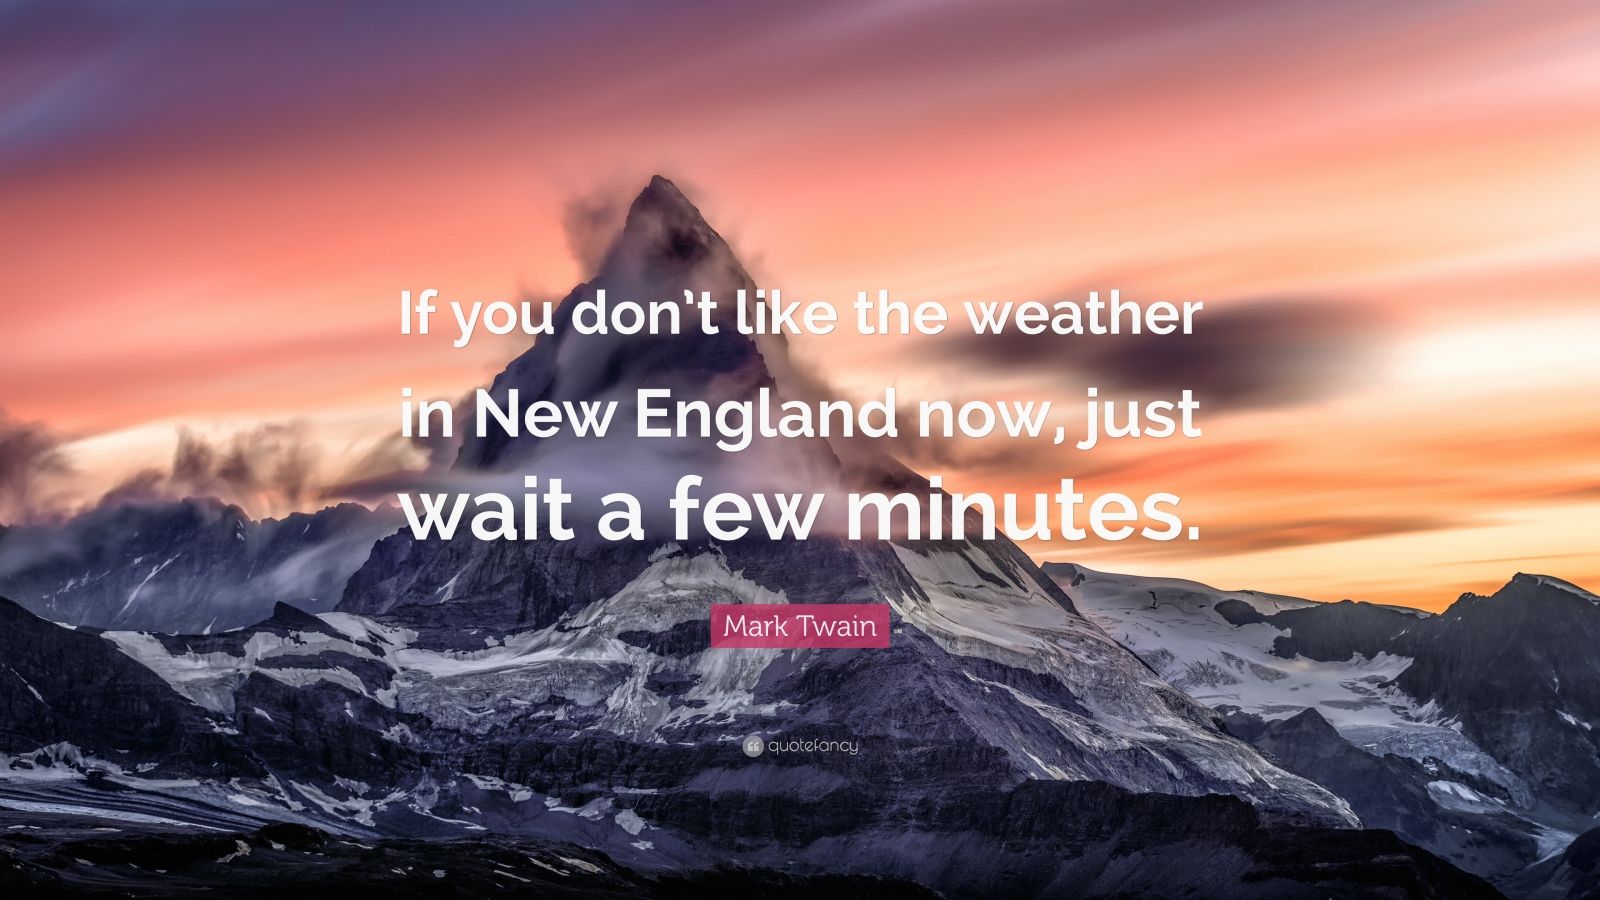 3724924-Mark-Twain-Quote-If-you-don-t-like-the-weather-in-New-England-now.jpg